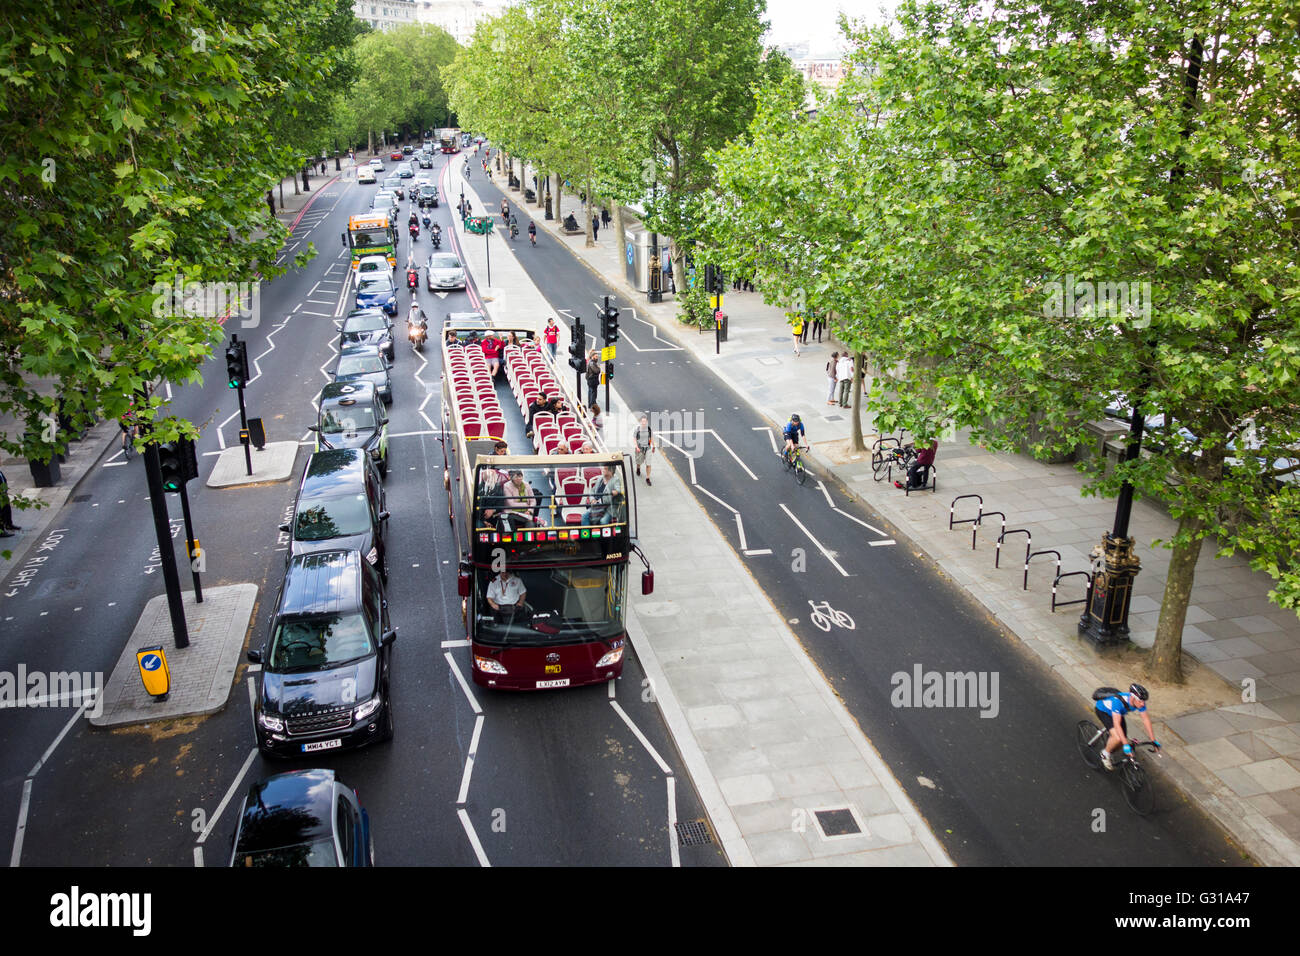 East-West Cycle Superhighway, Victoria Embankment cycle path. London, UK Stock Photo